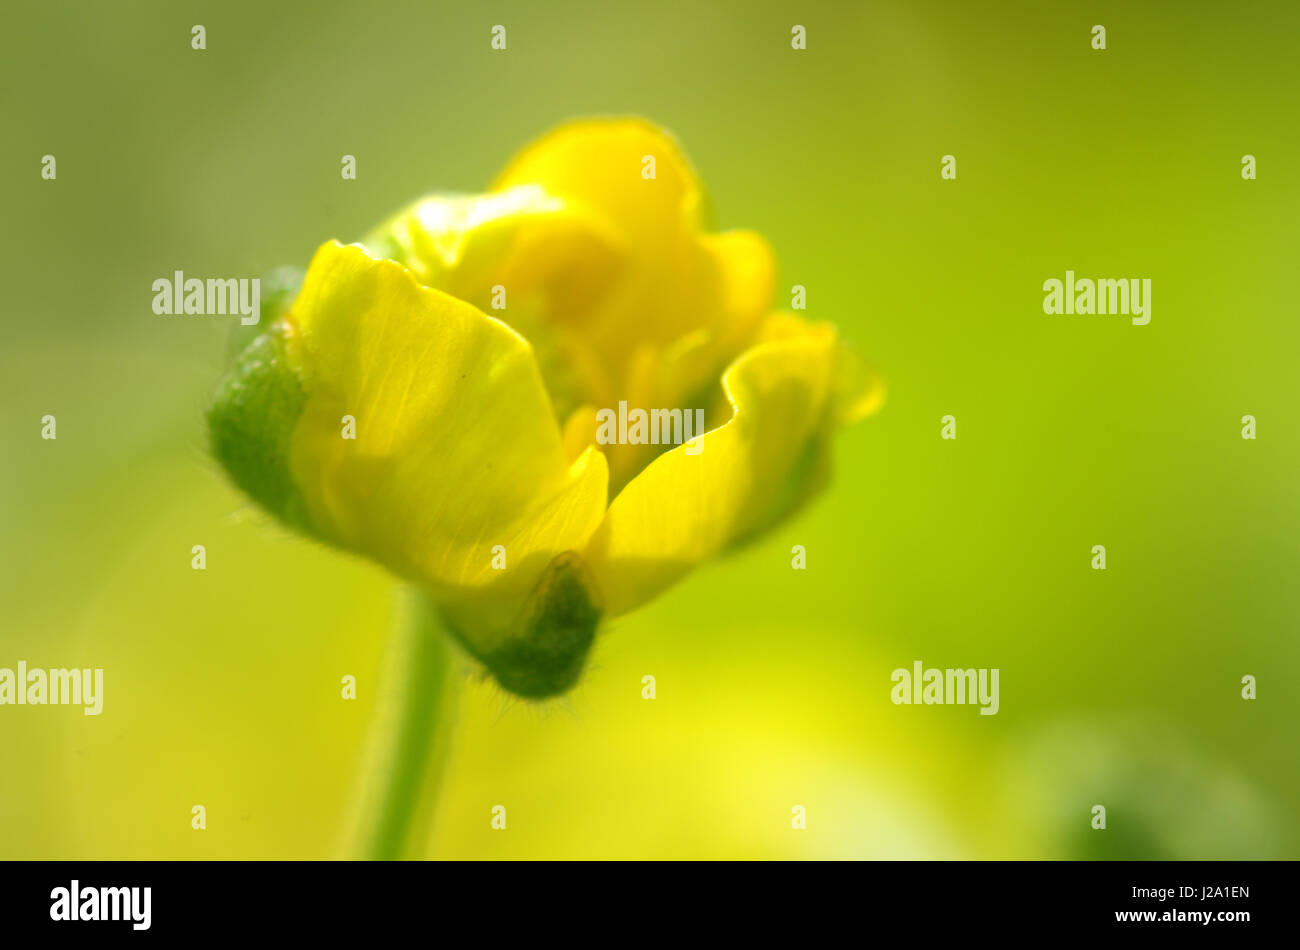 Guilder Buttercup in abstract with dull background Stock Photo